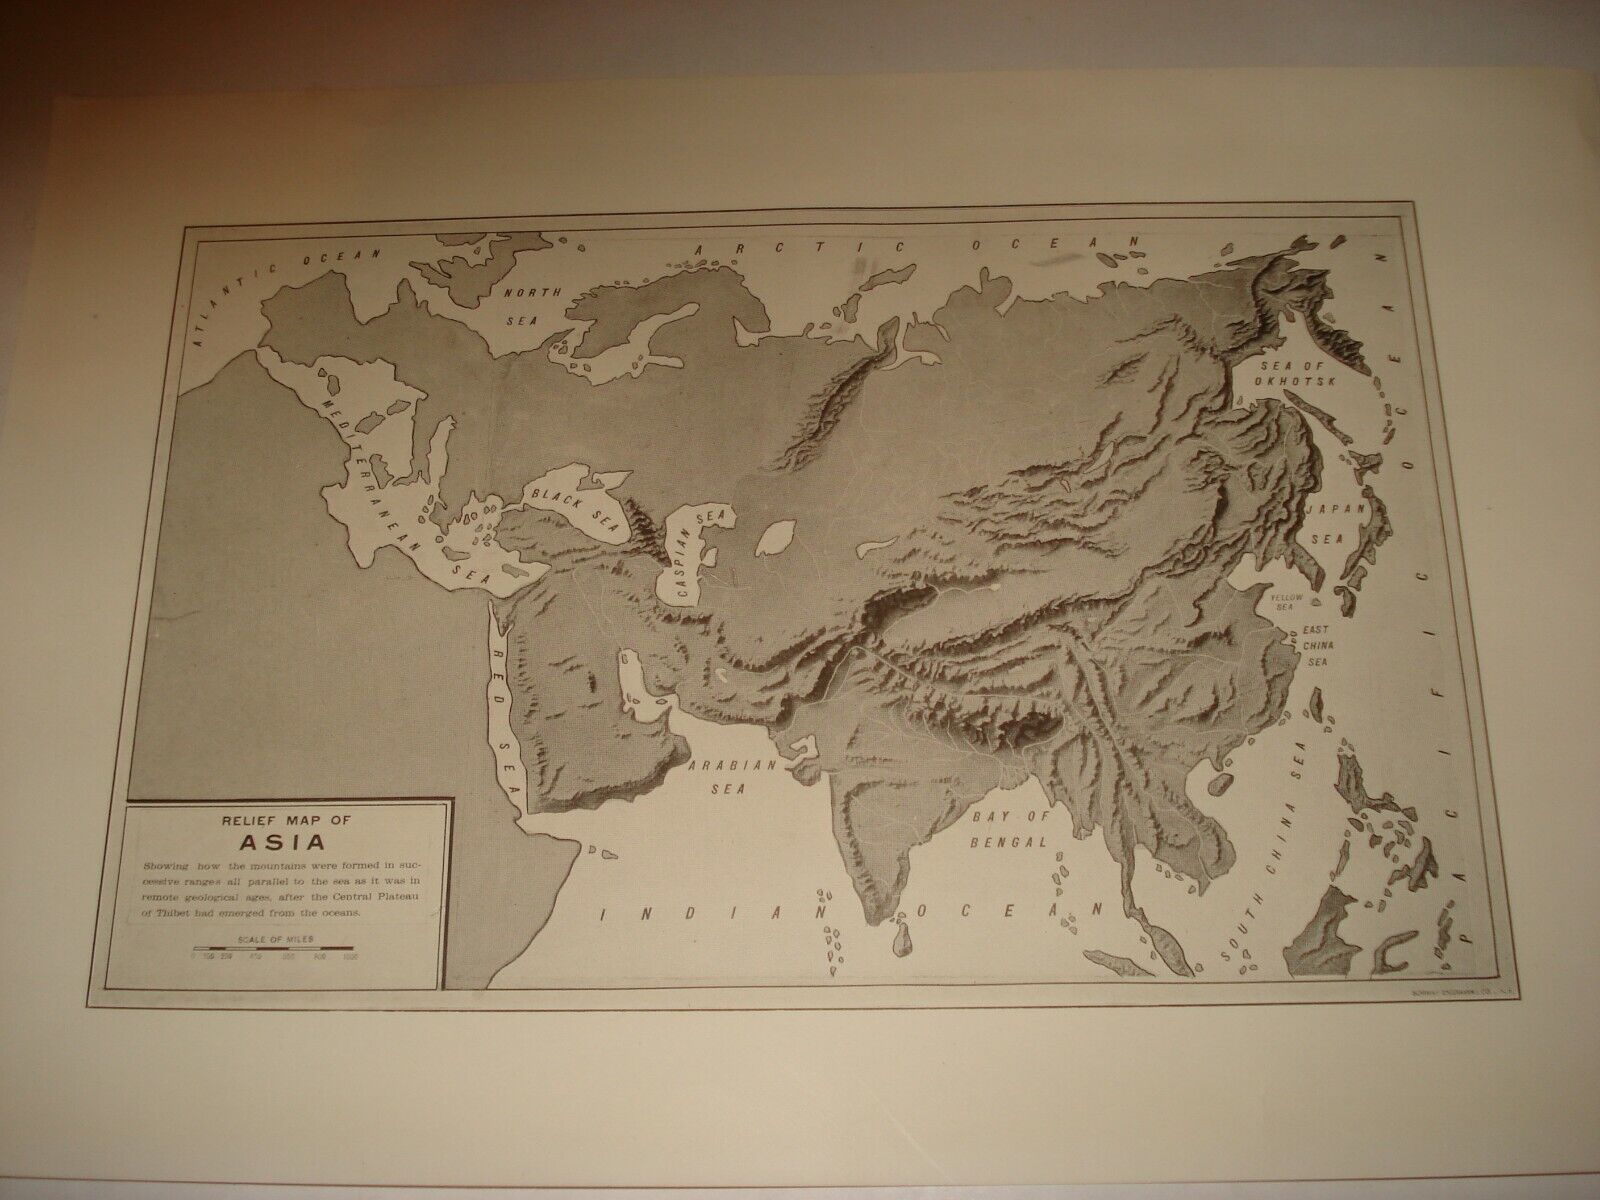 Lot of 5 Antique Maps 1903 1904  Asia Colorful Map Relief Rand McNally Без бренда - фотография #9